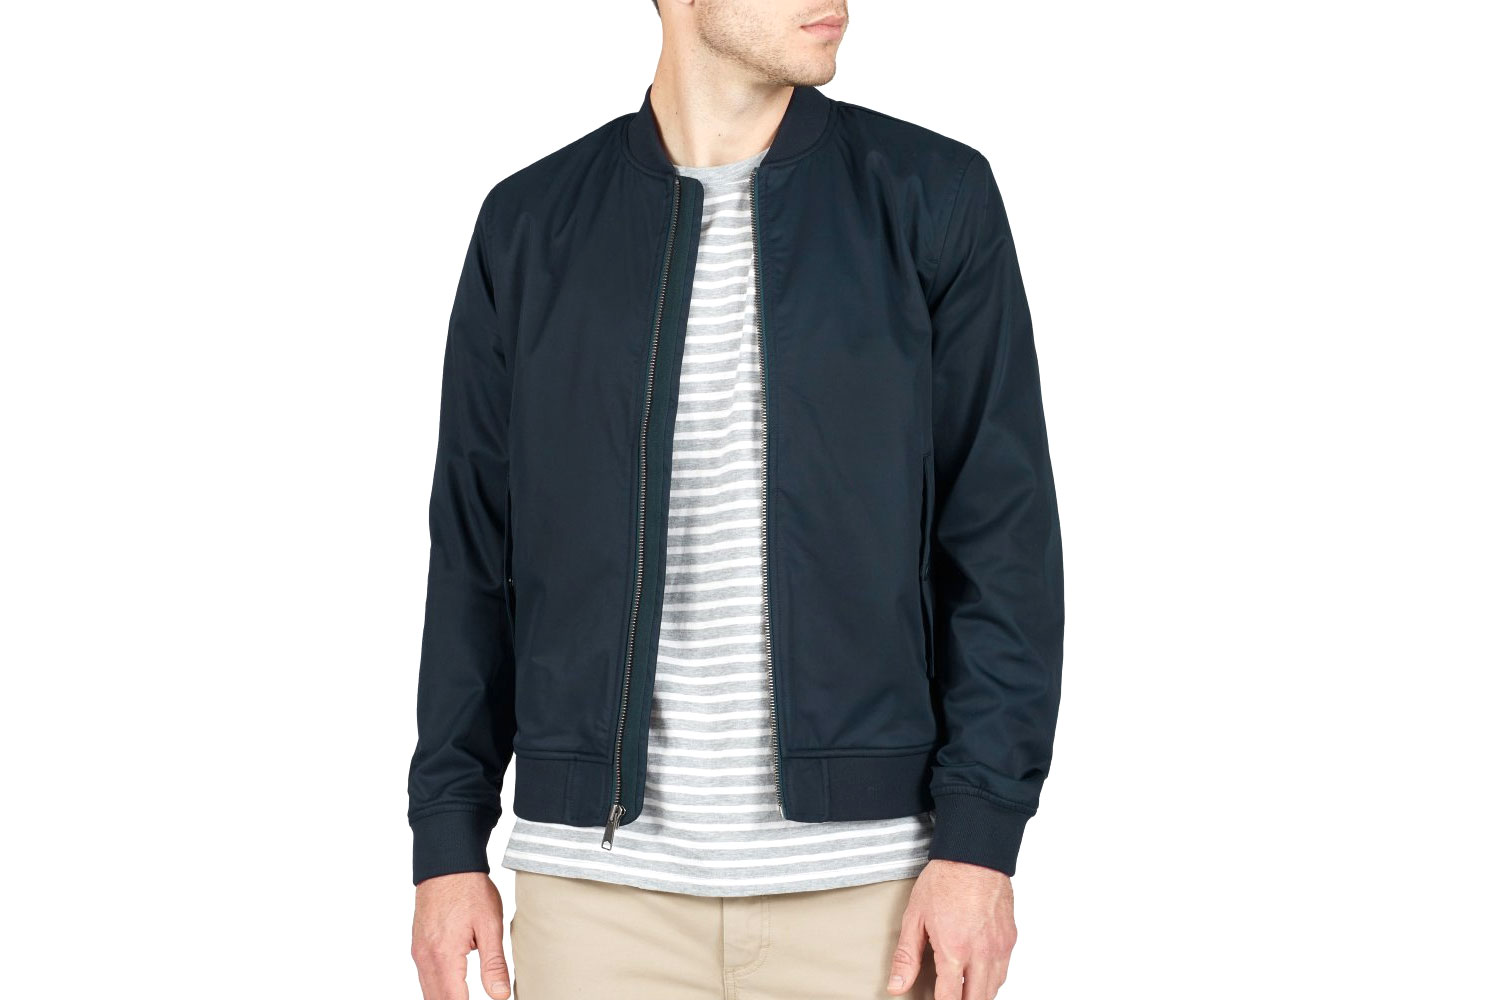 The Best Men's Spring Jackets to Keep You Cool, Dry, and Comfortable ...